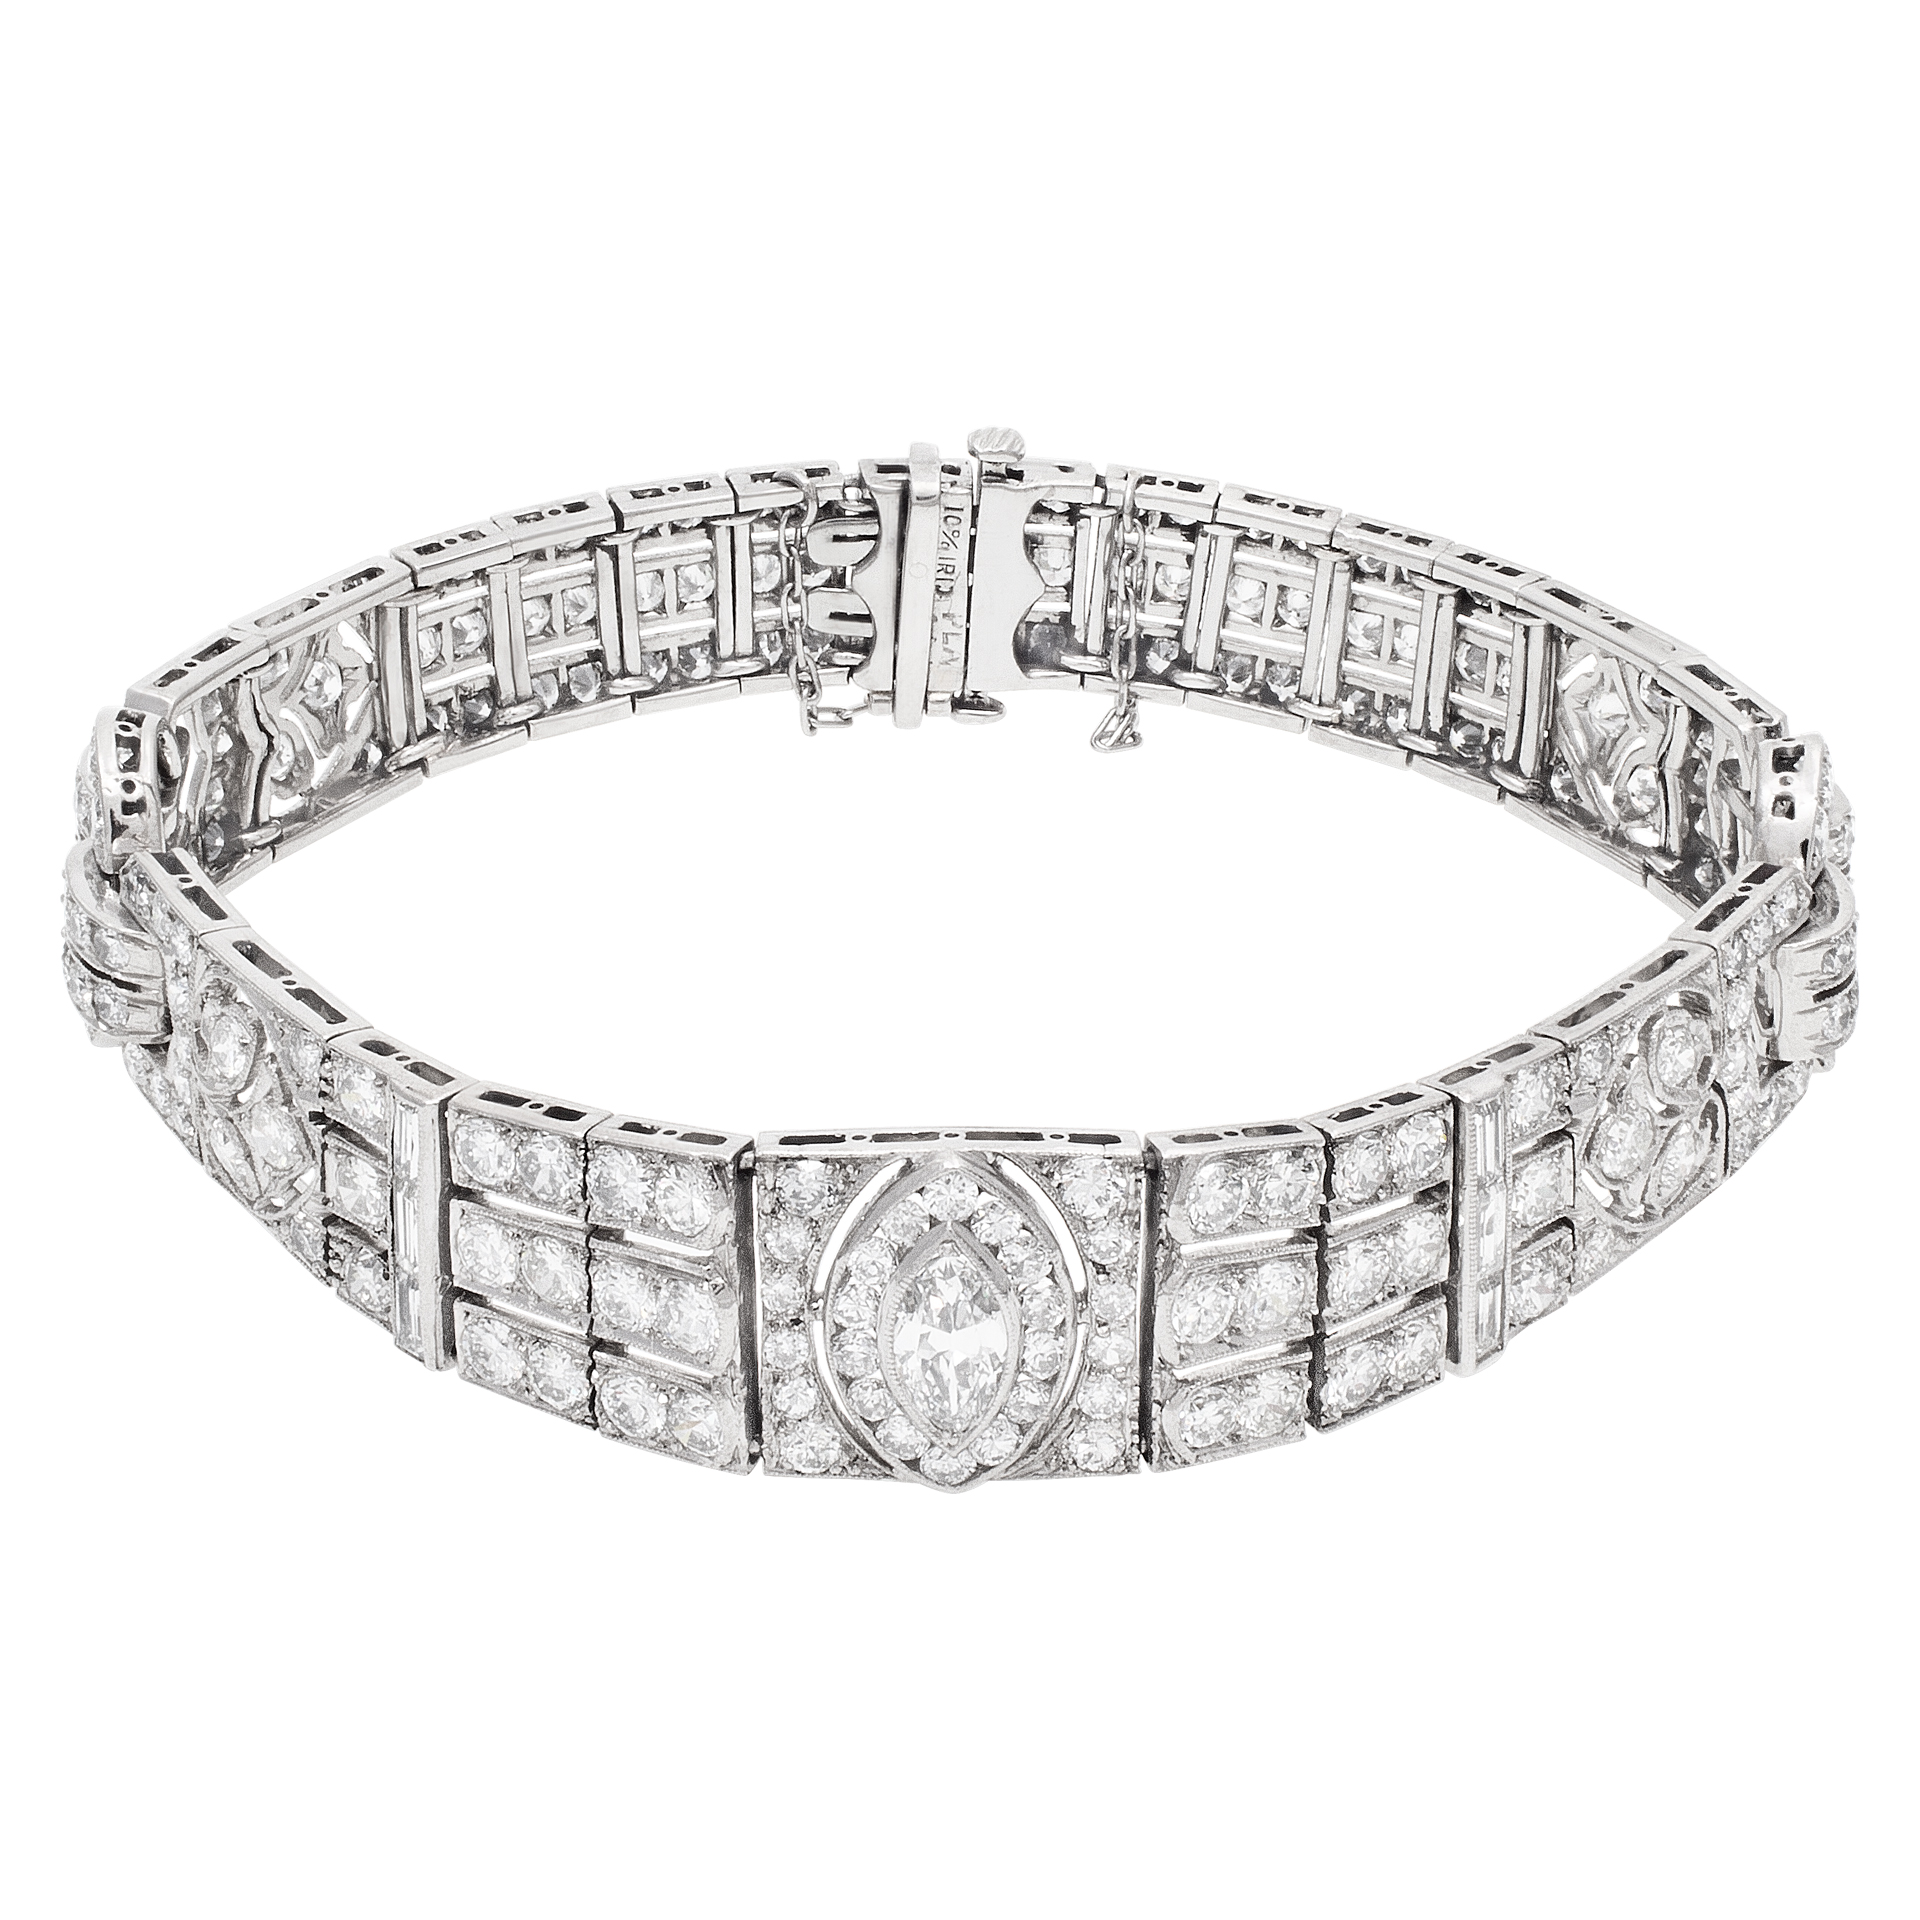 Art Deco, diamonds bracelet in platinum with approximately 8.55 carats Marquis, Baguettes and full brilliant Round  cut diamonds. 6.75 inches long.